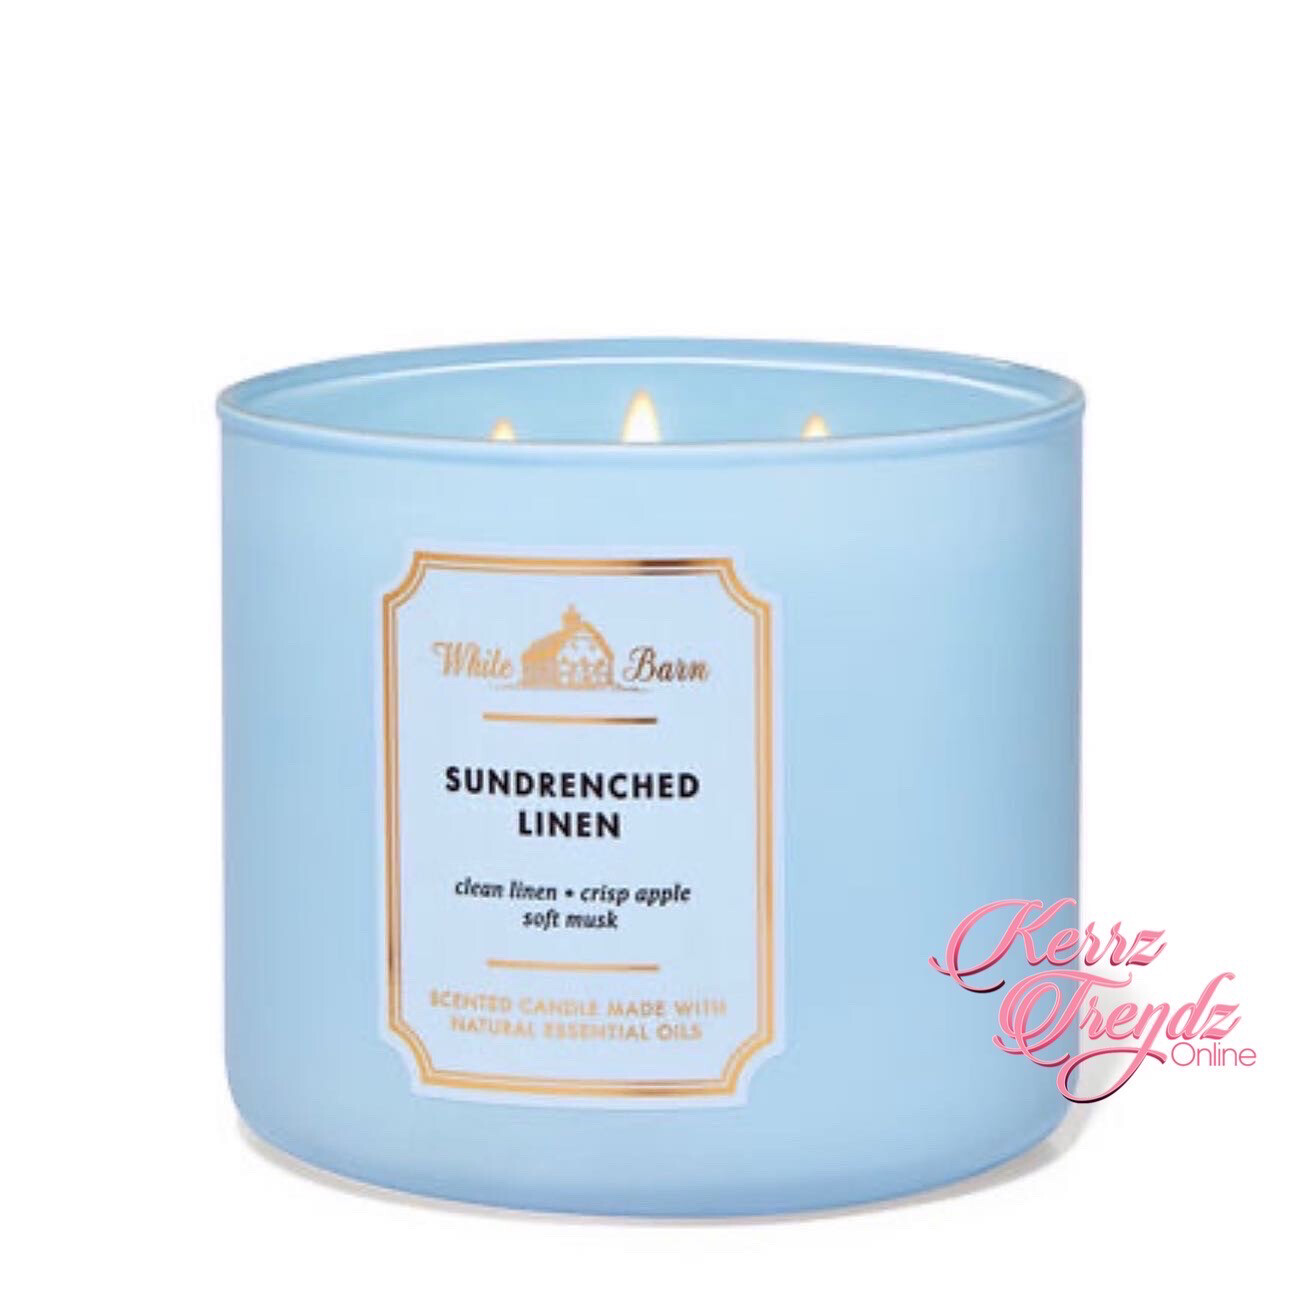 SUNDRENCHED Linen 3-Wick Candle